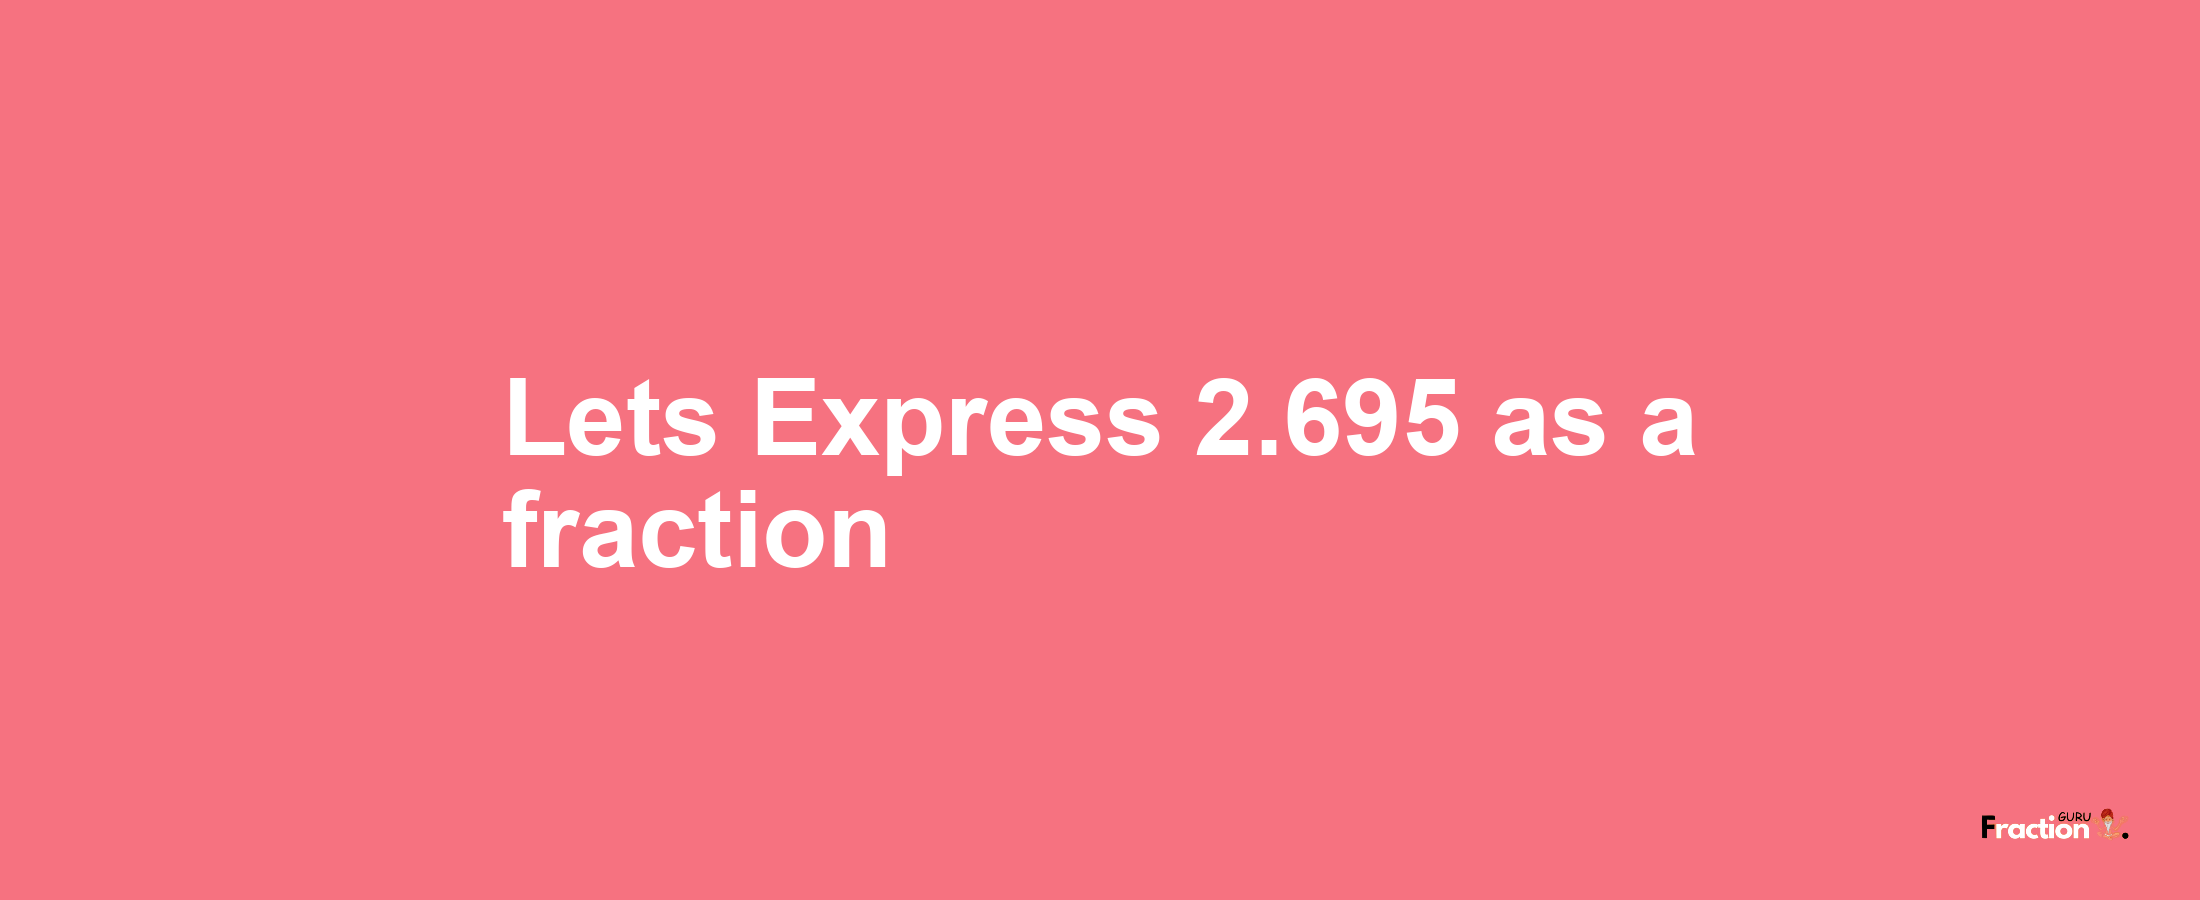 Lets Express 2.695 as afraction